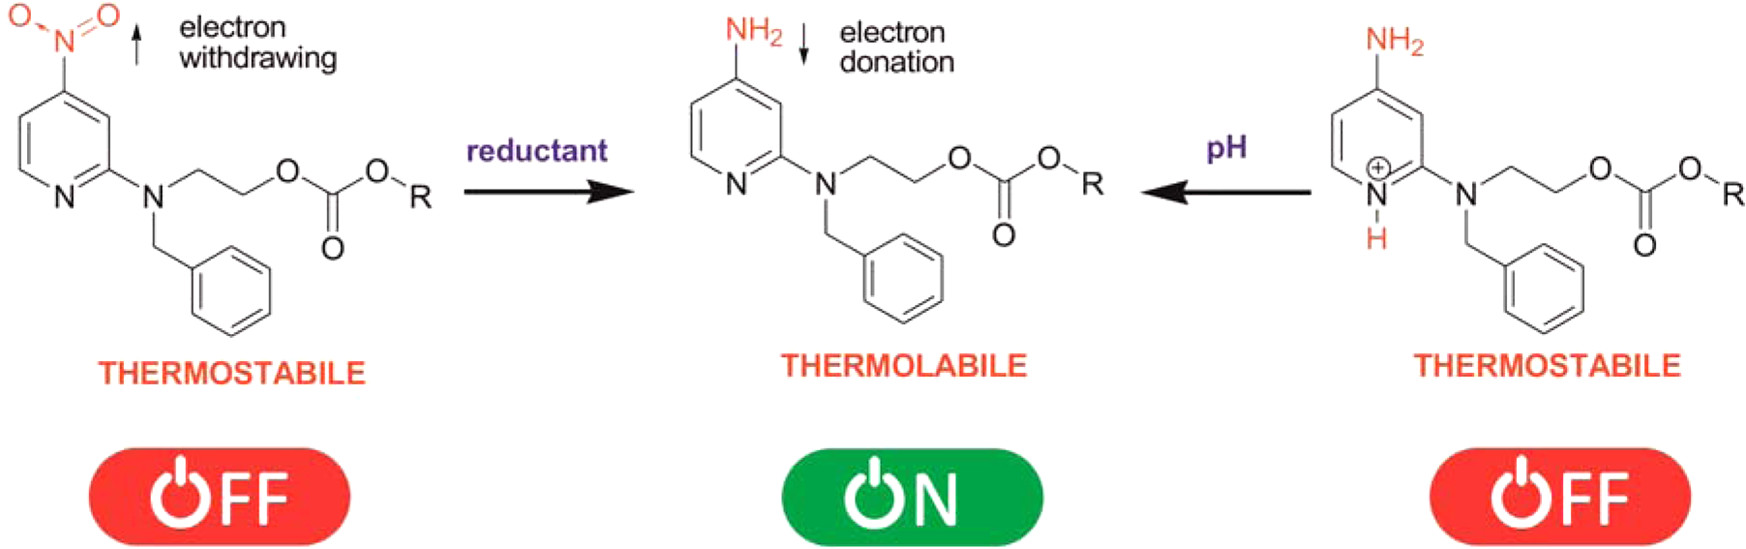 Modulating the Stability of 2-Pyridinyl Thermolabile Hydroxyl Protecting Groups via the “Chemical Switch” Approach 